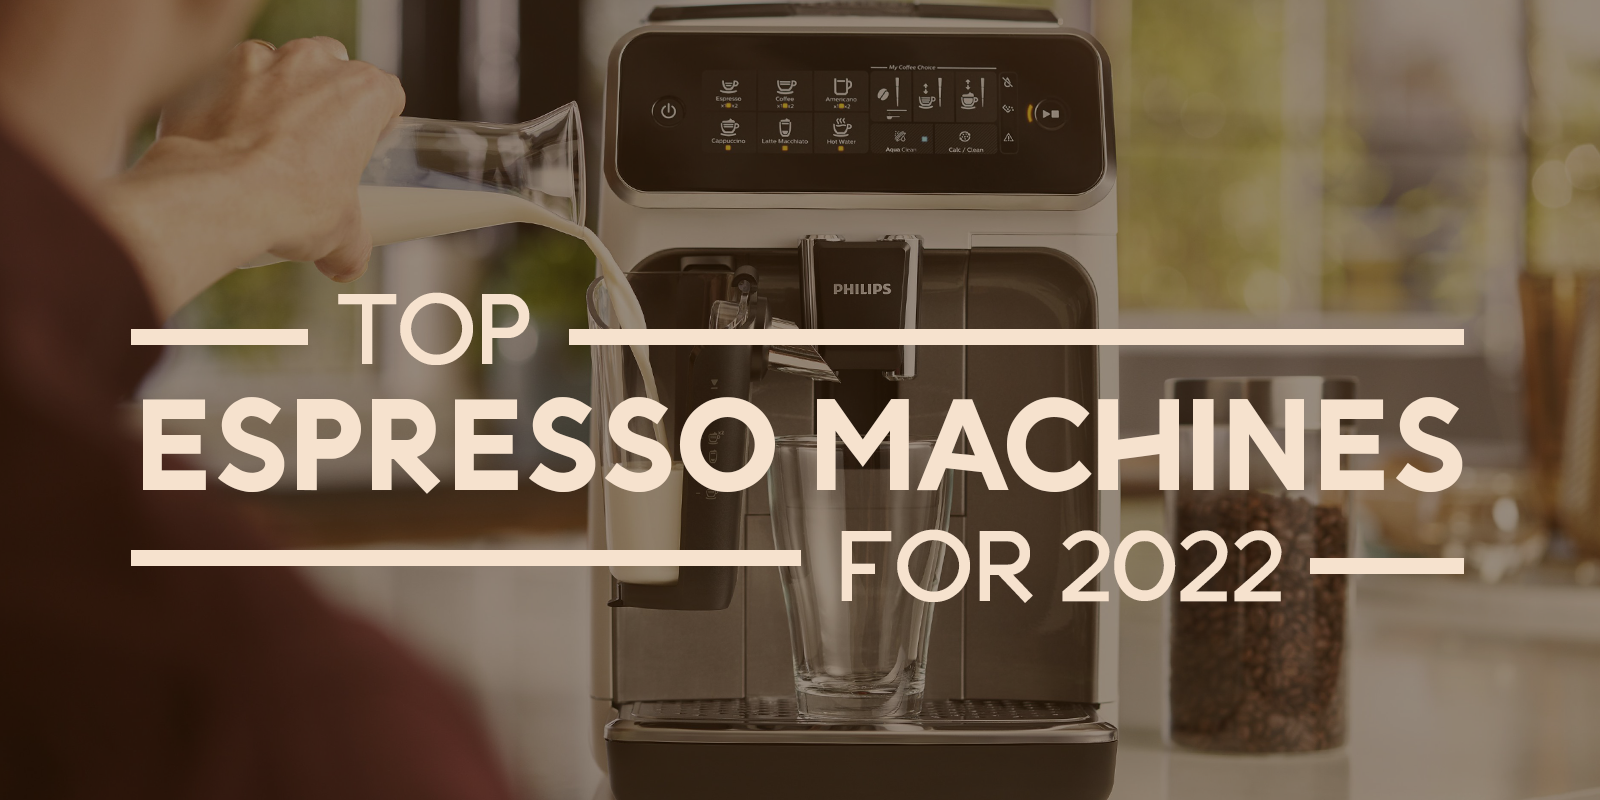  PHILIPS 3200 Series Fully Automatic Espresso Machine, LatteGo  Milk Frother, 5 Coffee Varieties, Intuitive Touch Display, 100% Ceramic  Grinder, AquaClean Filter, My Coffee Choice, Black (EP3241/54): Home &  Kitchen